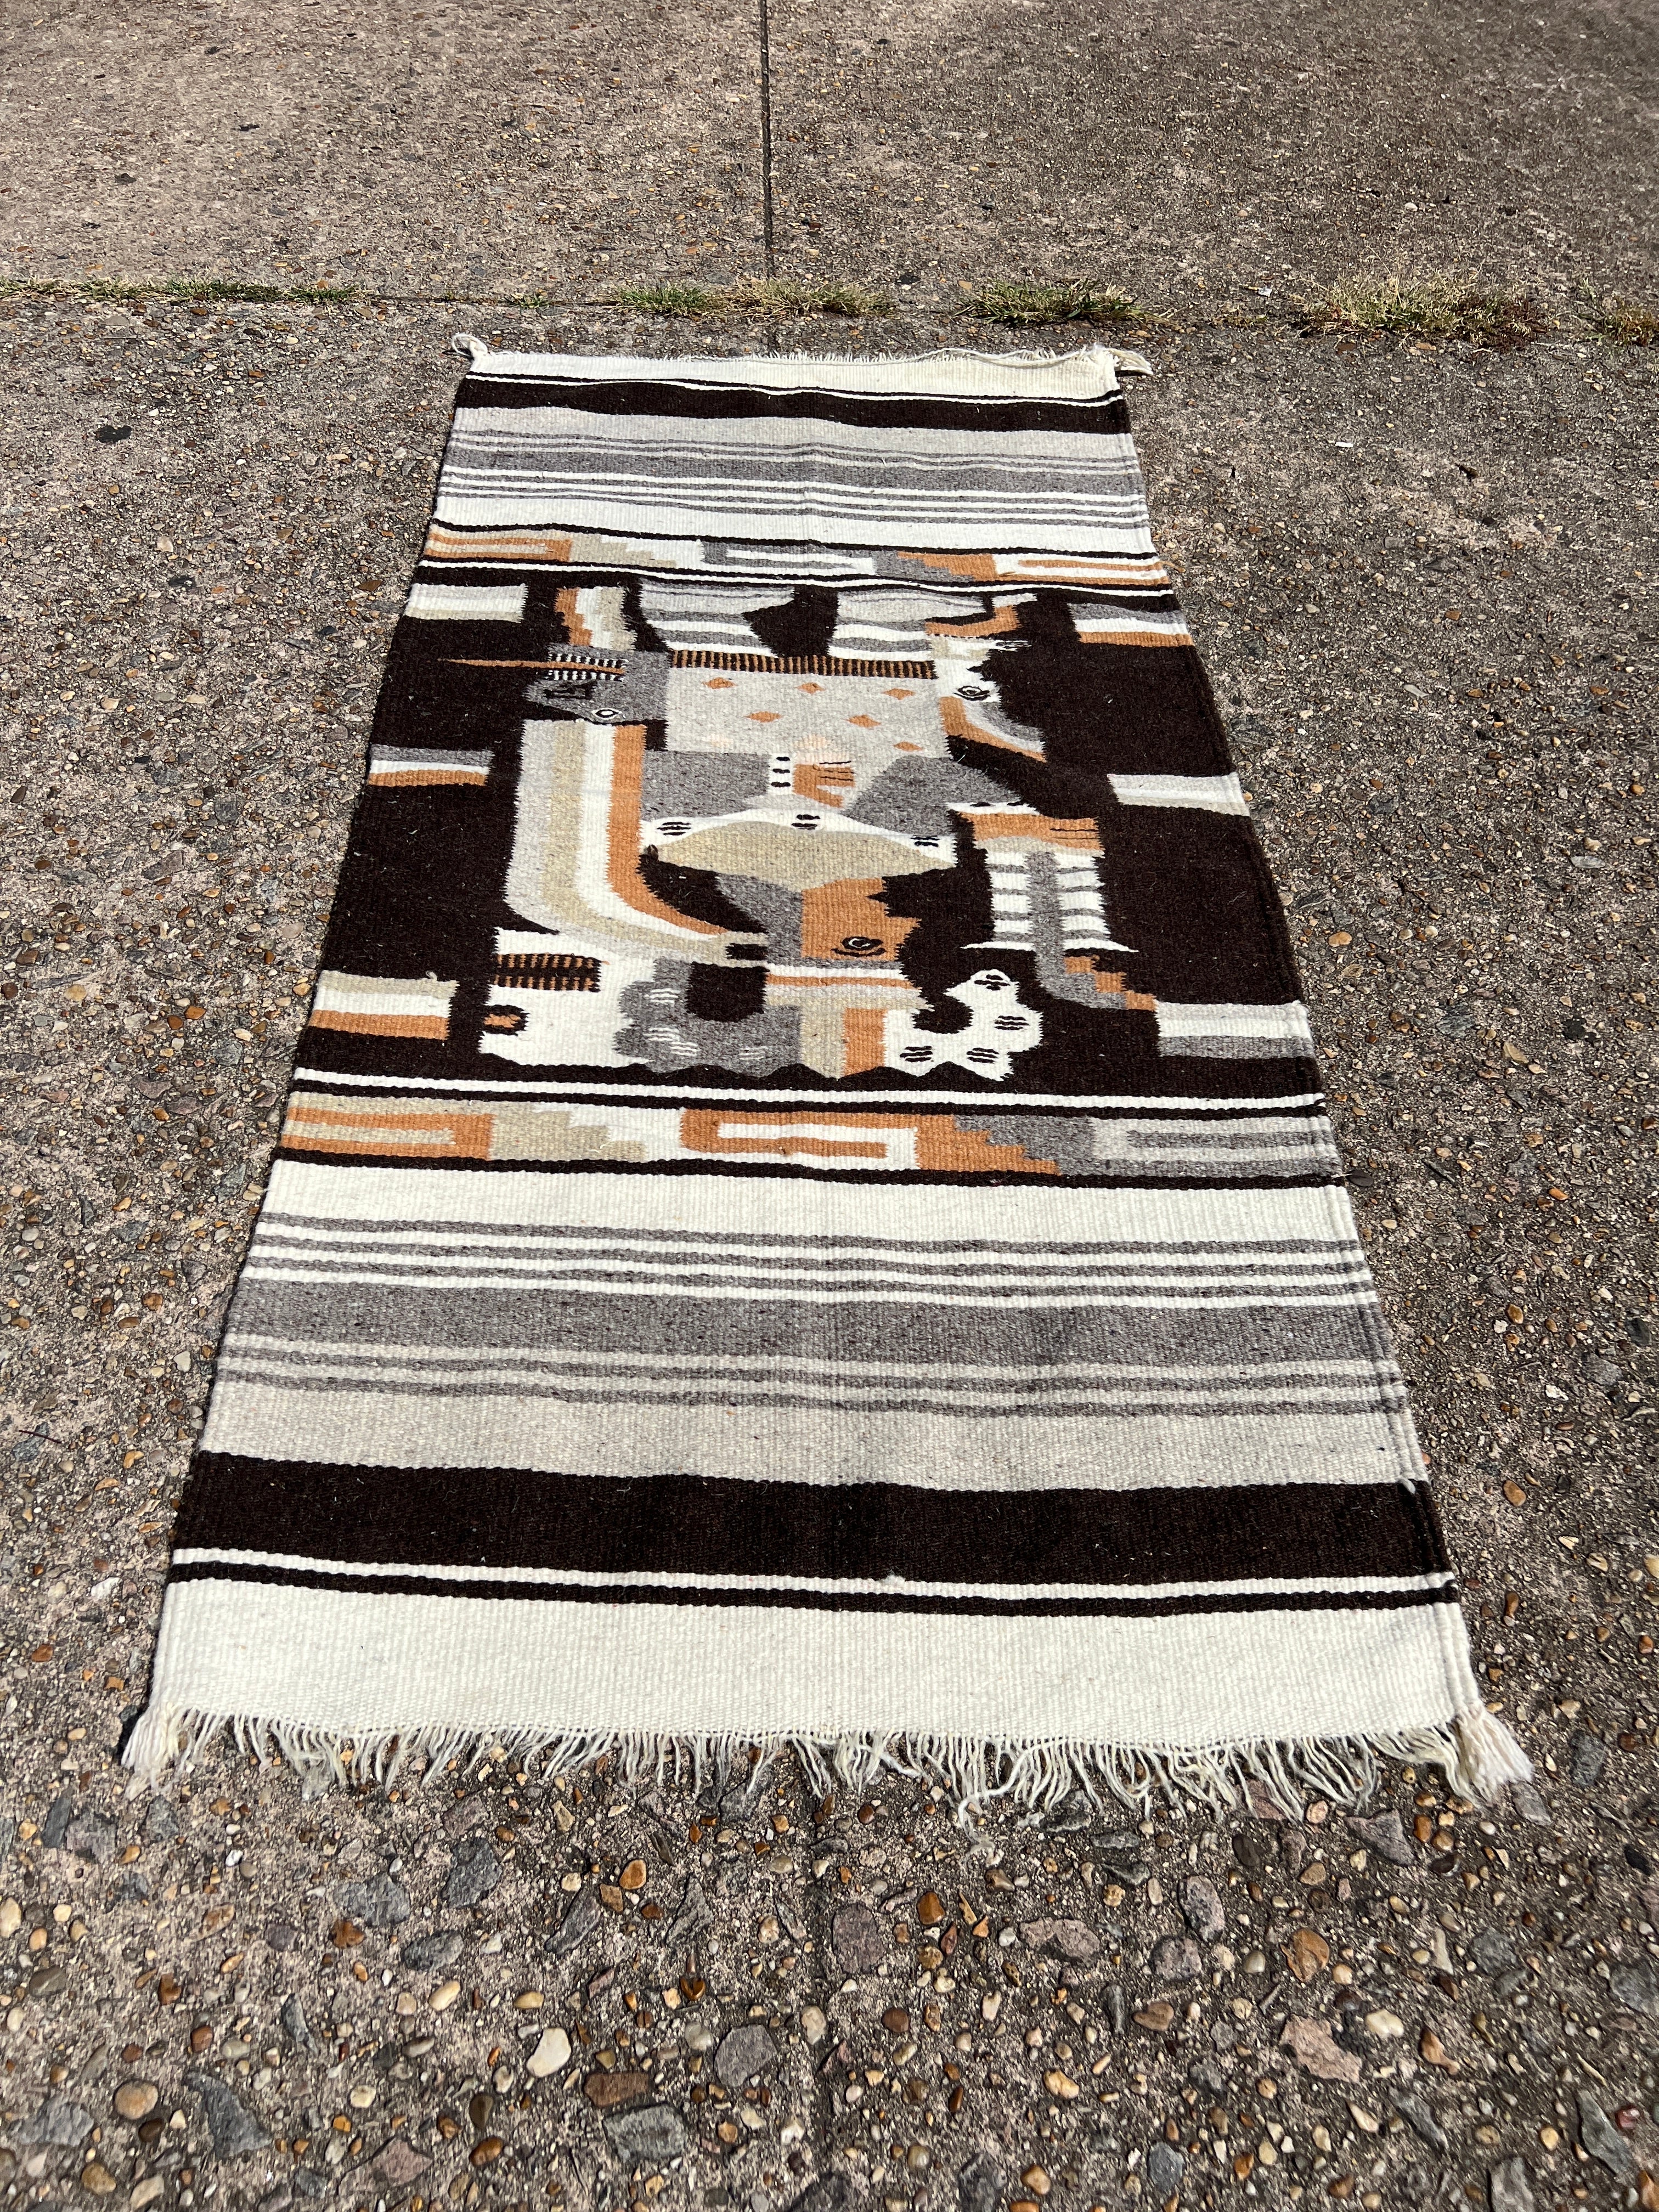 Mayan-Style Rug/Tapestry | 2'2" x 4'7"